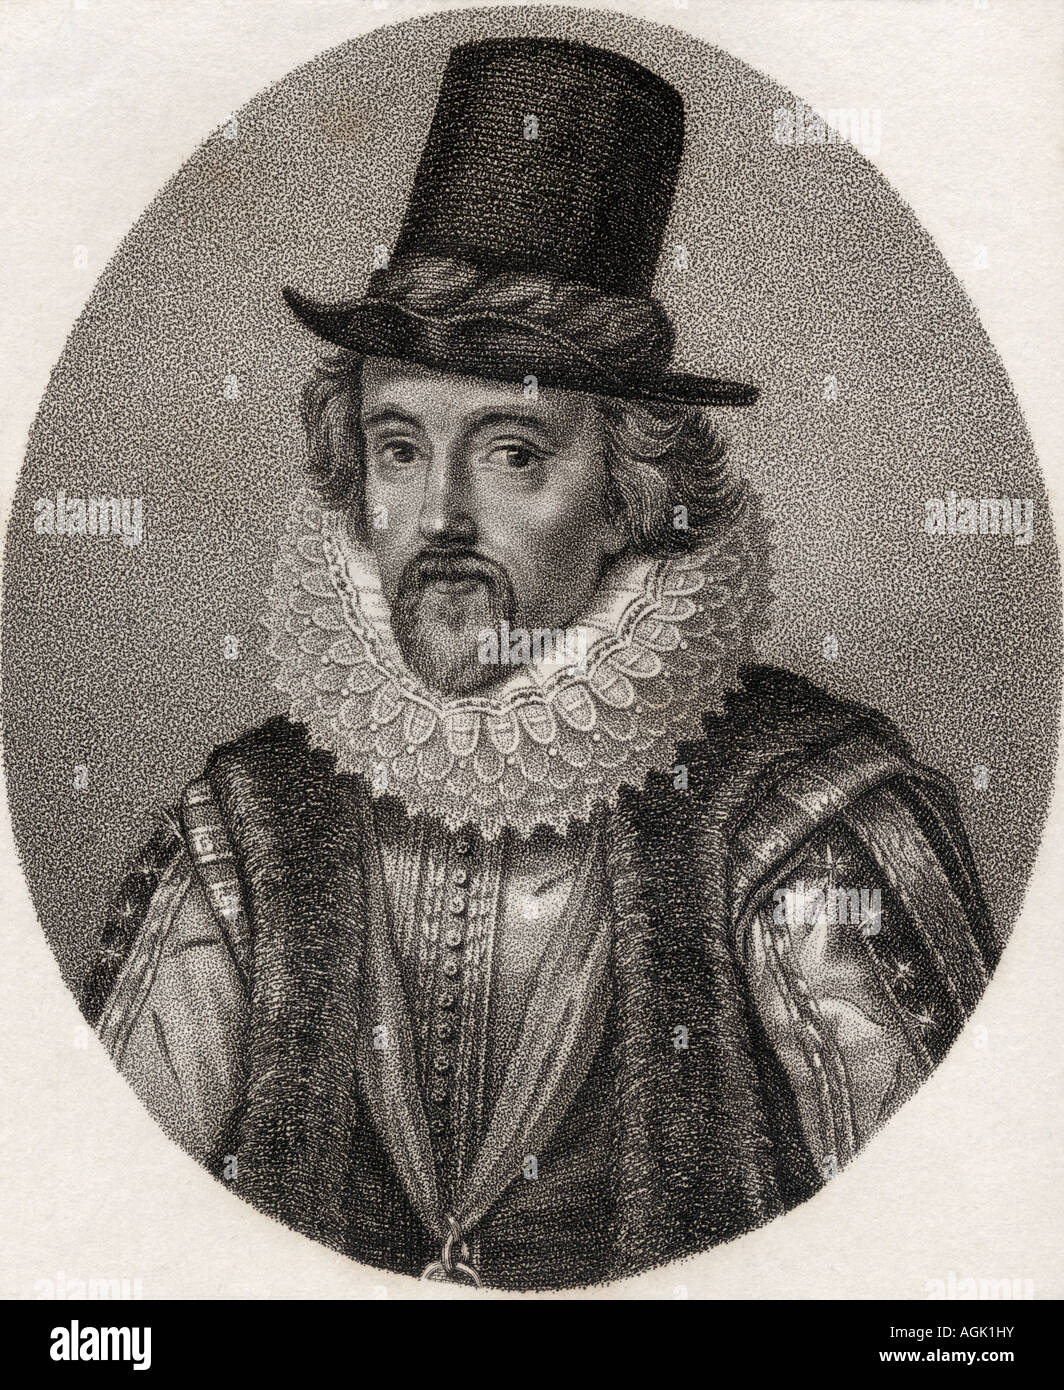 Francis Bacon, 1st Viscount St Alban,1561 – 1626.  English philosopher, statesman, scientist, jurist orator and author. Stock Photo